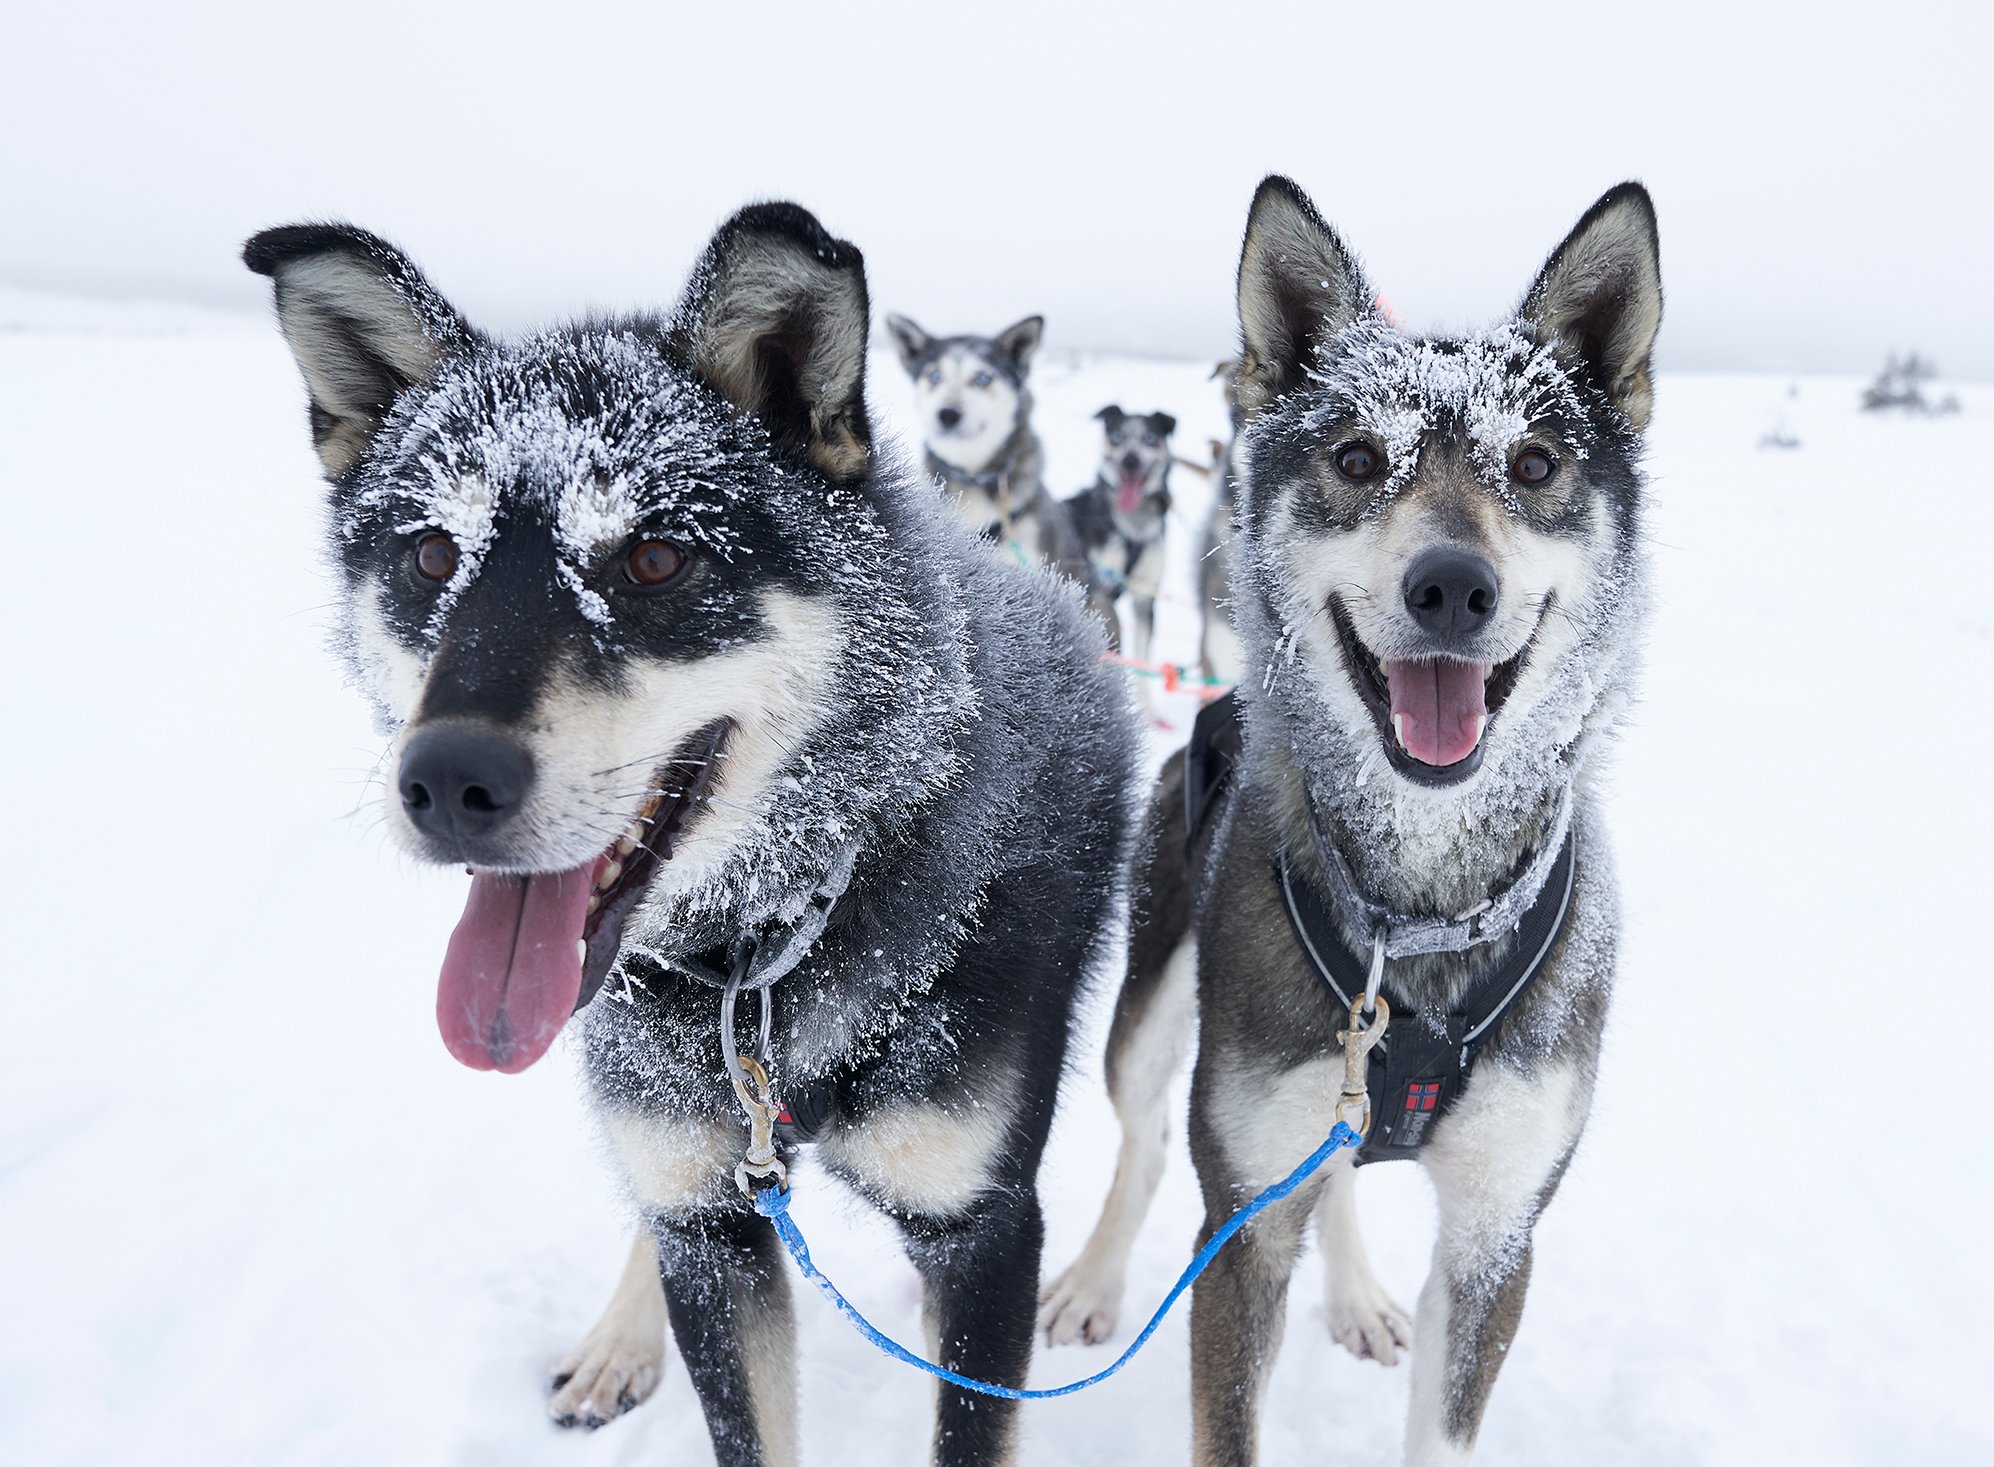 Why Do They Say Mush to Make Sled Dogs Go?